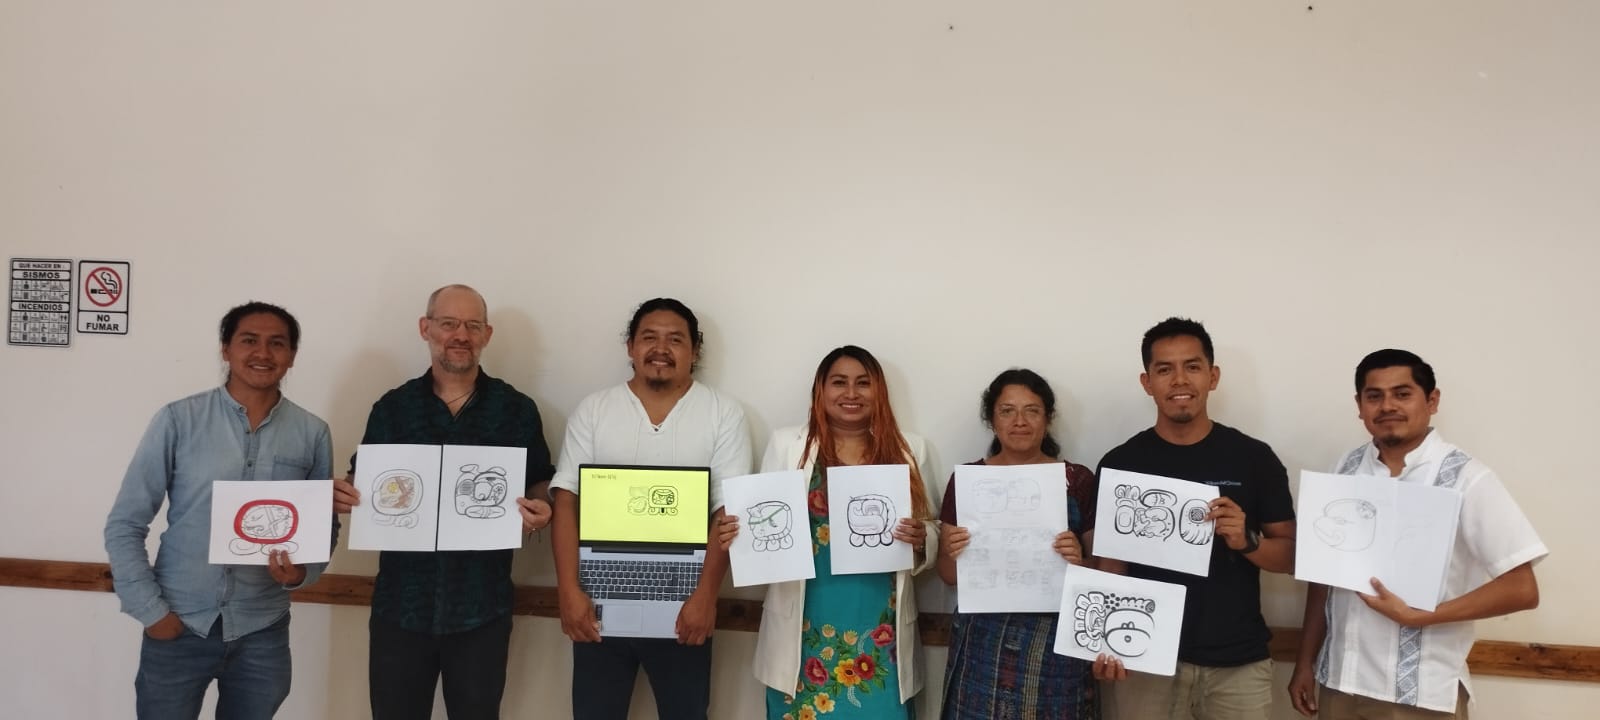 A group of people holding up drawings

Description automatically generated